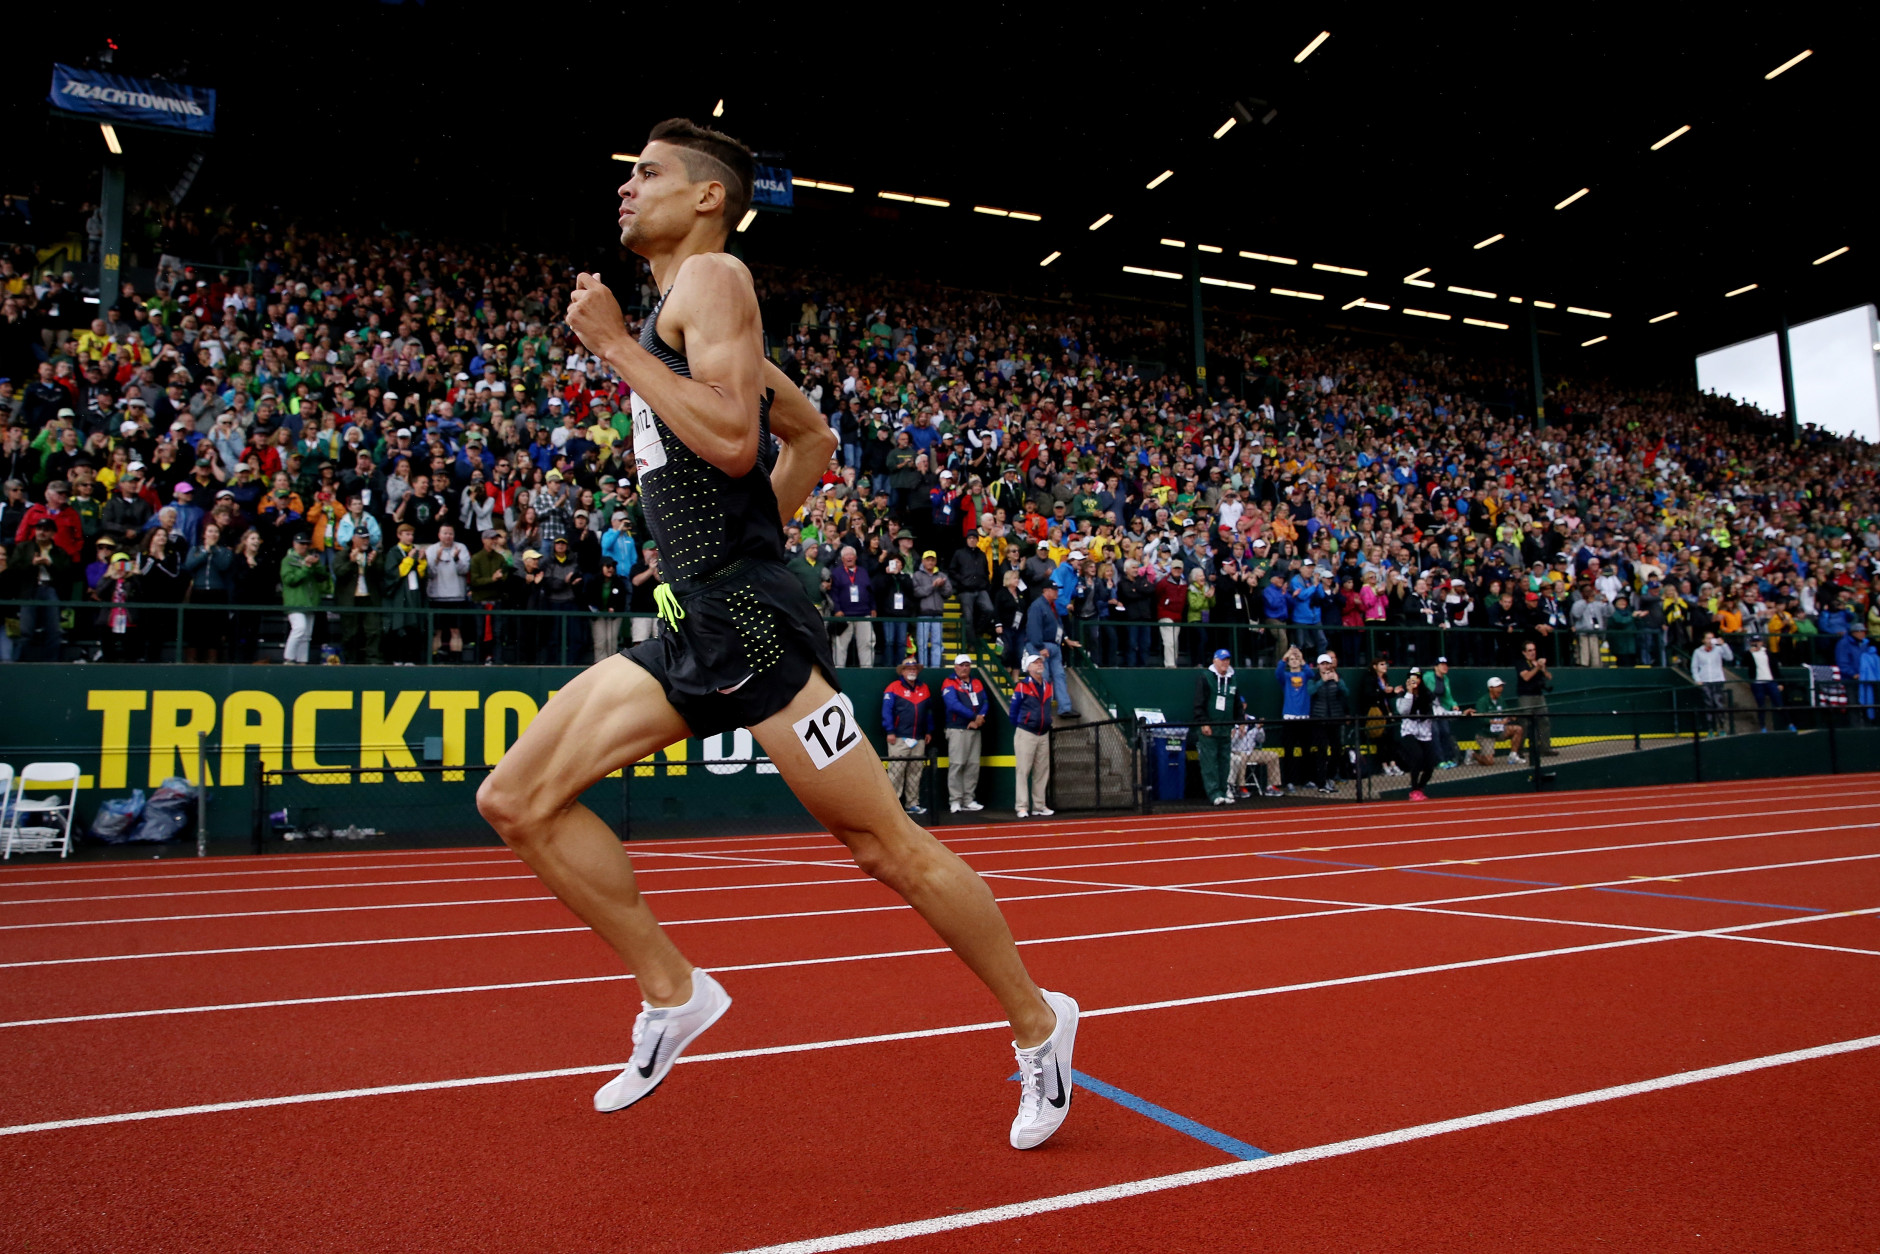 EUGENE, OR - JULY 10:  Matthew Centrowitz runs to the finish to place first in the Men's 1500 Meter Final during the 2016 U.S. Olympic Track &amp; Field Team Trials at Hayward Field on July 10, 2016 in Eugene, Oregon.  (Photo by Andy Lyons/Getty Images)